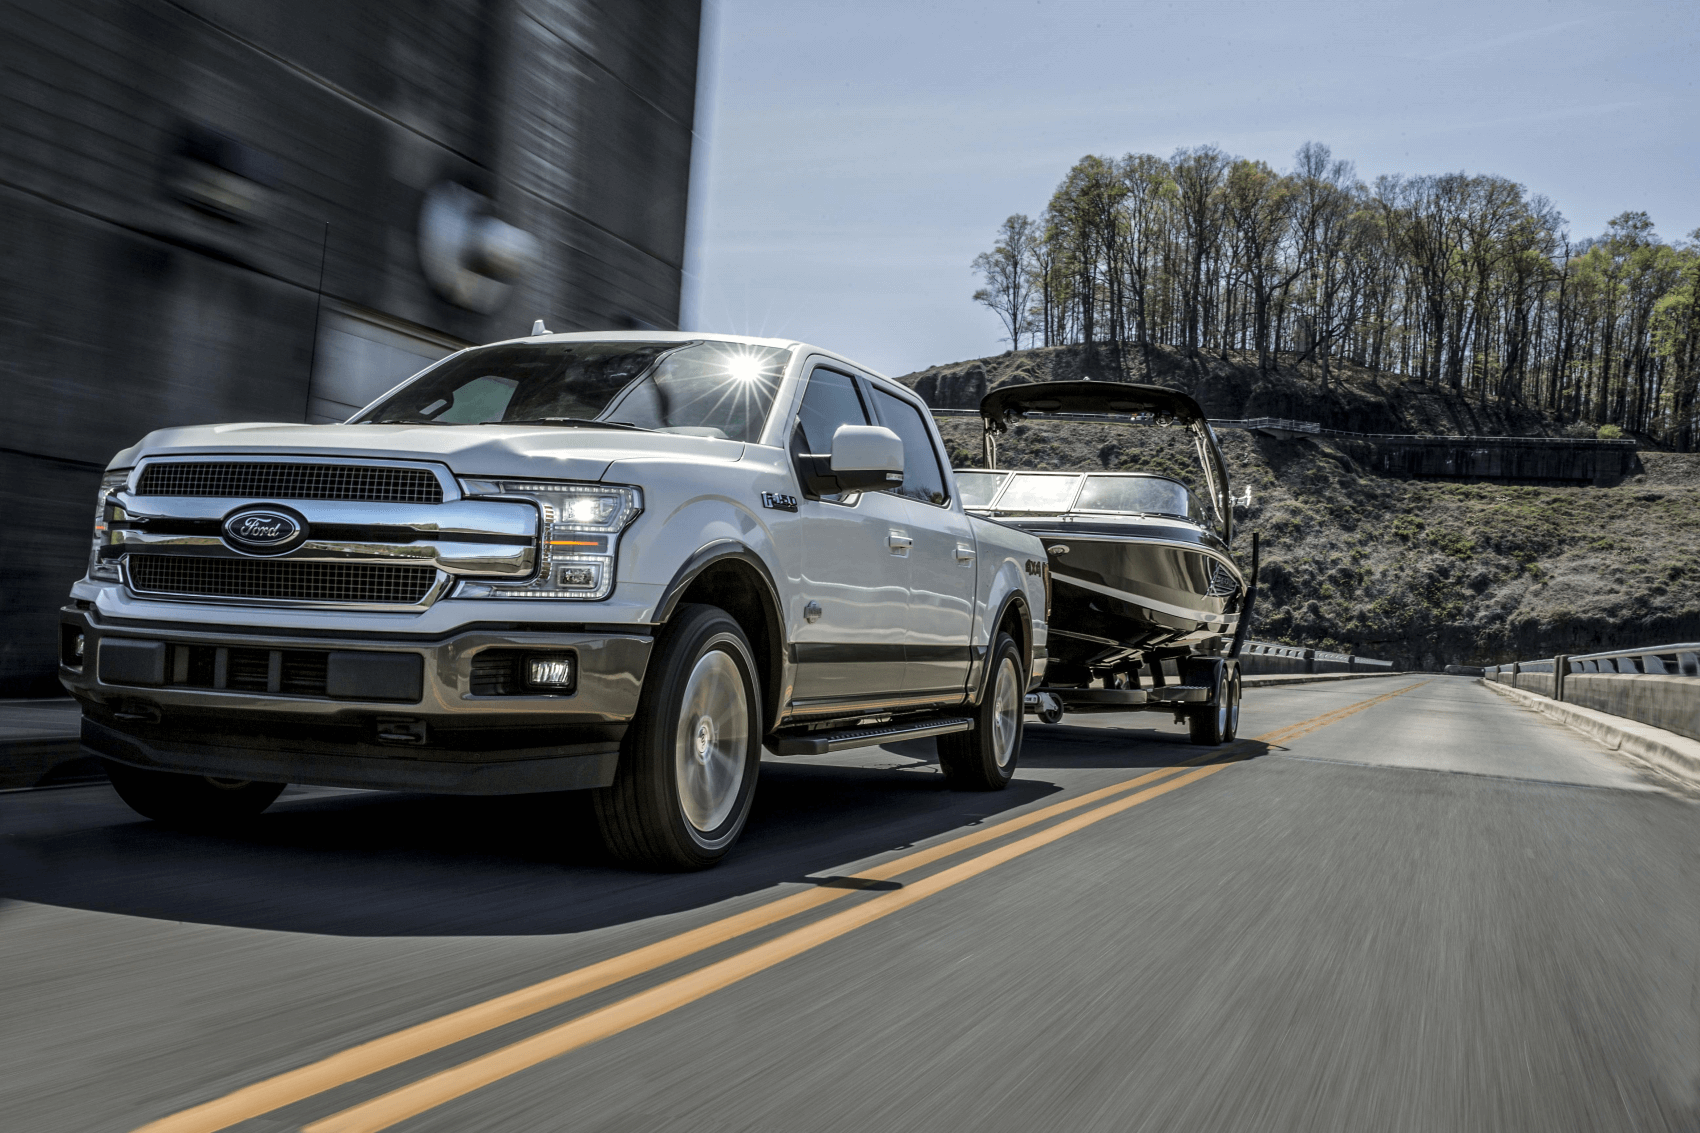 Used Ford F-150 Silver Towing